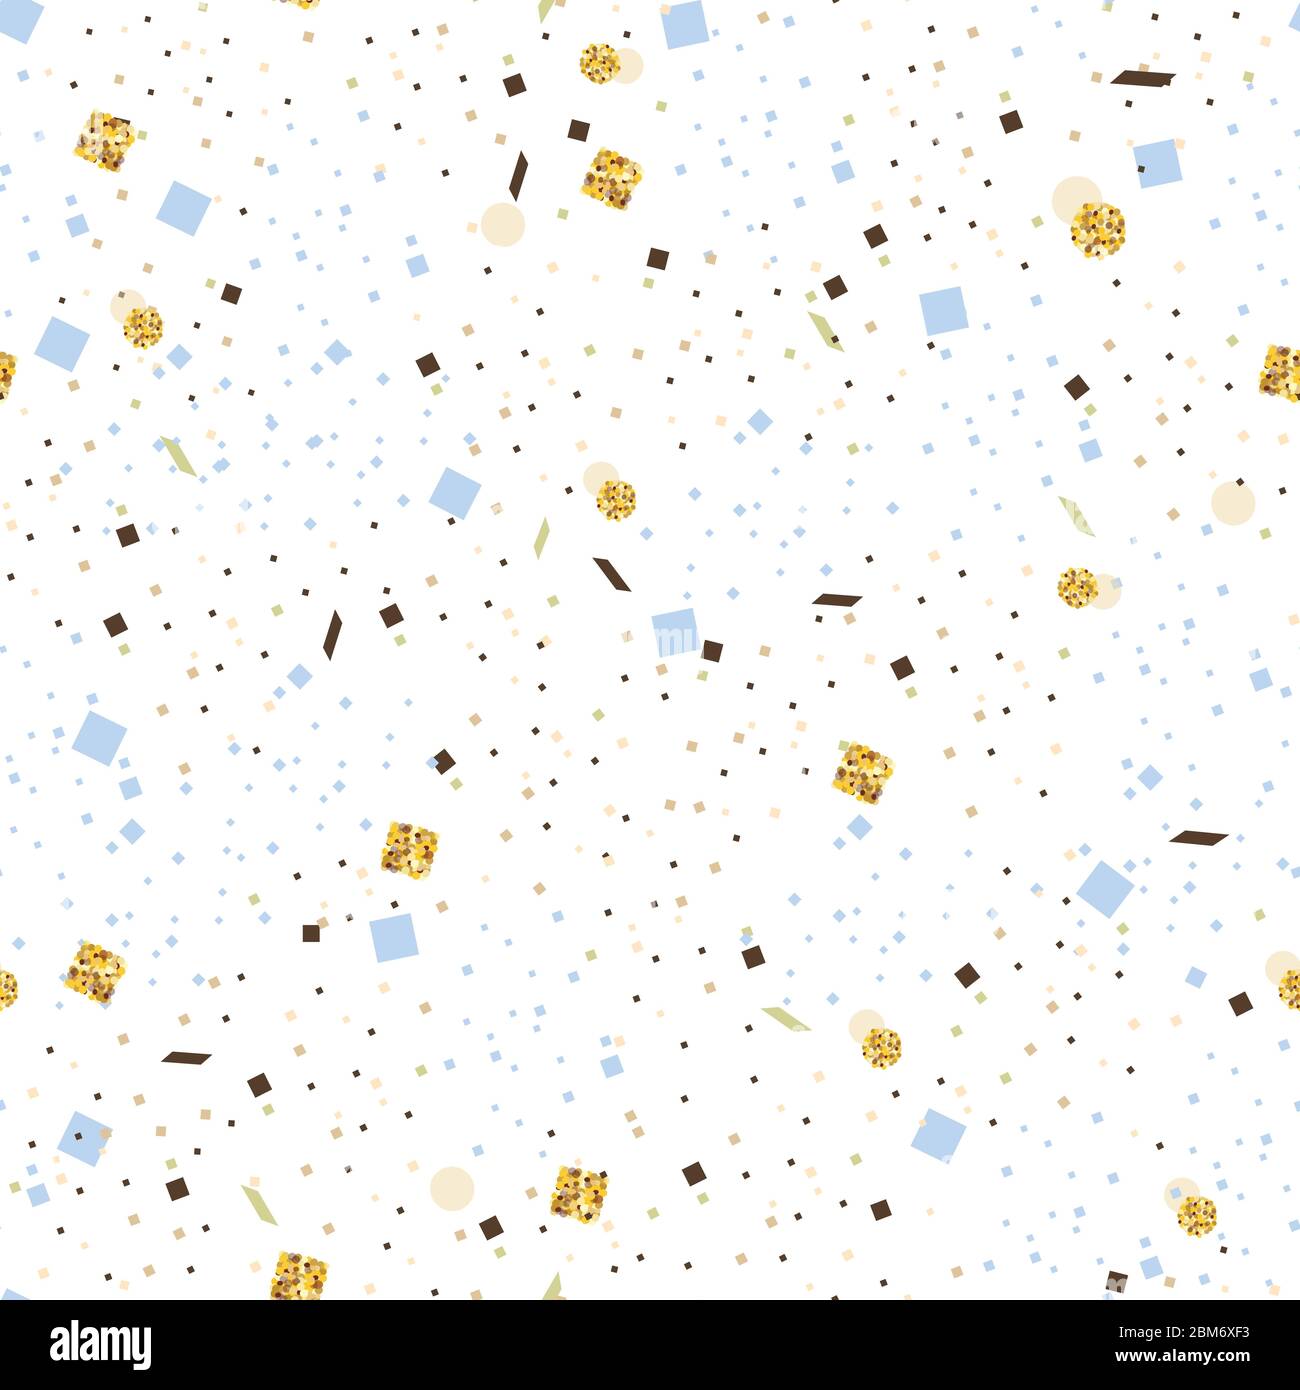 Glitter gold circle and polka dots, squares, sprinkles. Blue squares. Advertisement, birthday, t-shirt, business, baby shower, wallpaper, baby room Stock Vector